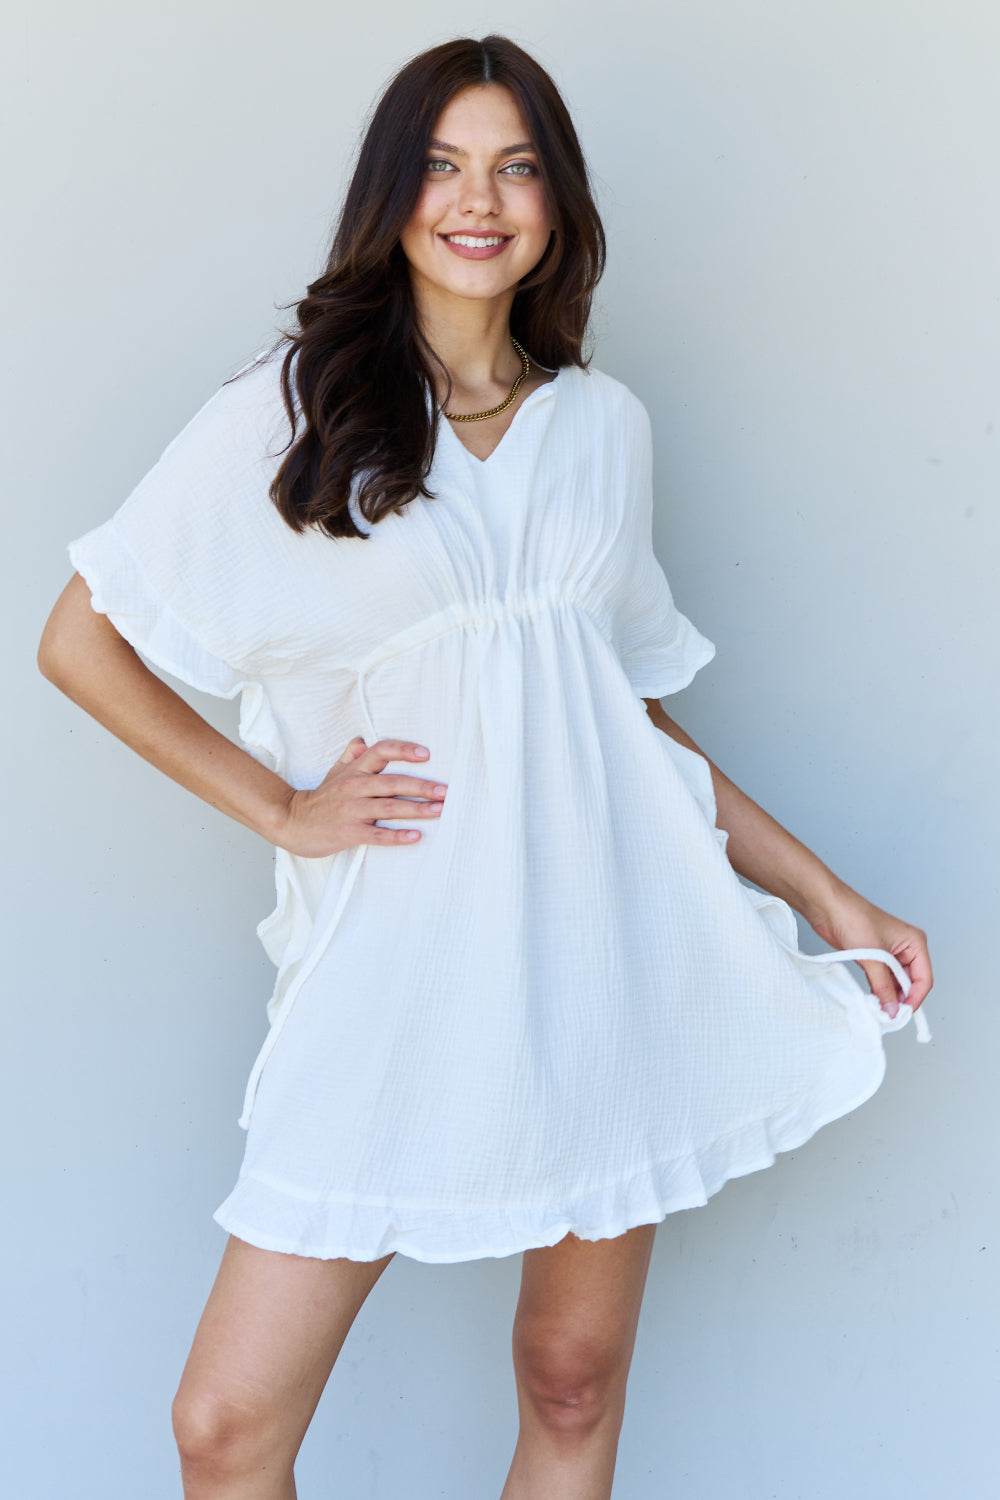 Hazel Blues® |  Ninexis Out Of Time Ruffle Hem Dress with Drawstring Waistband in White